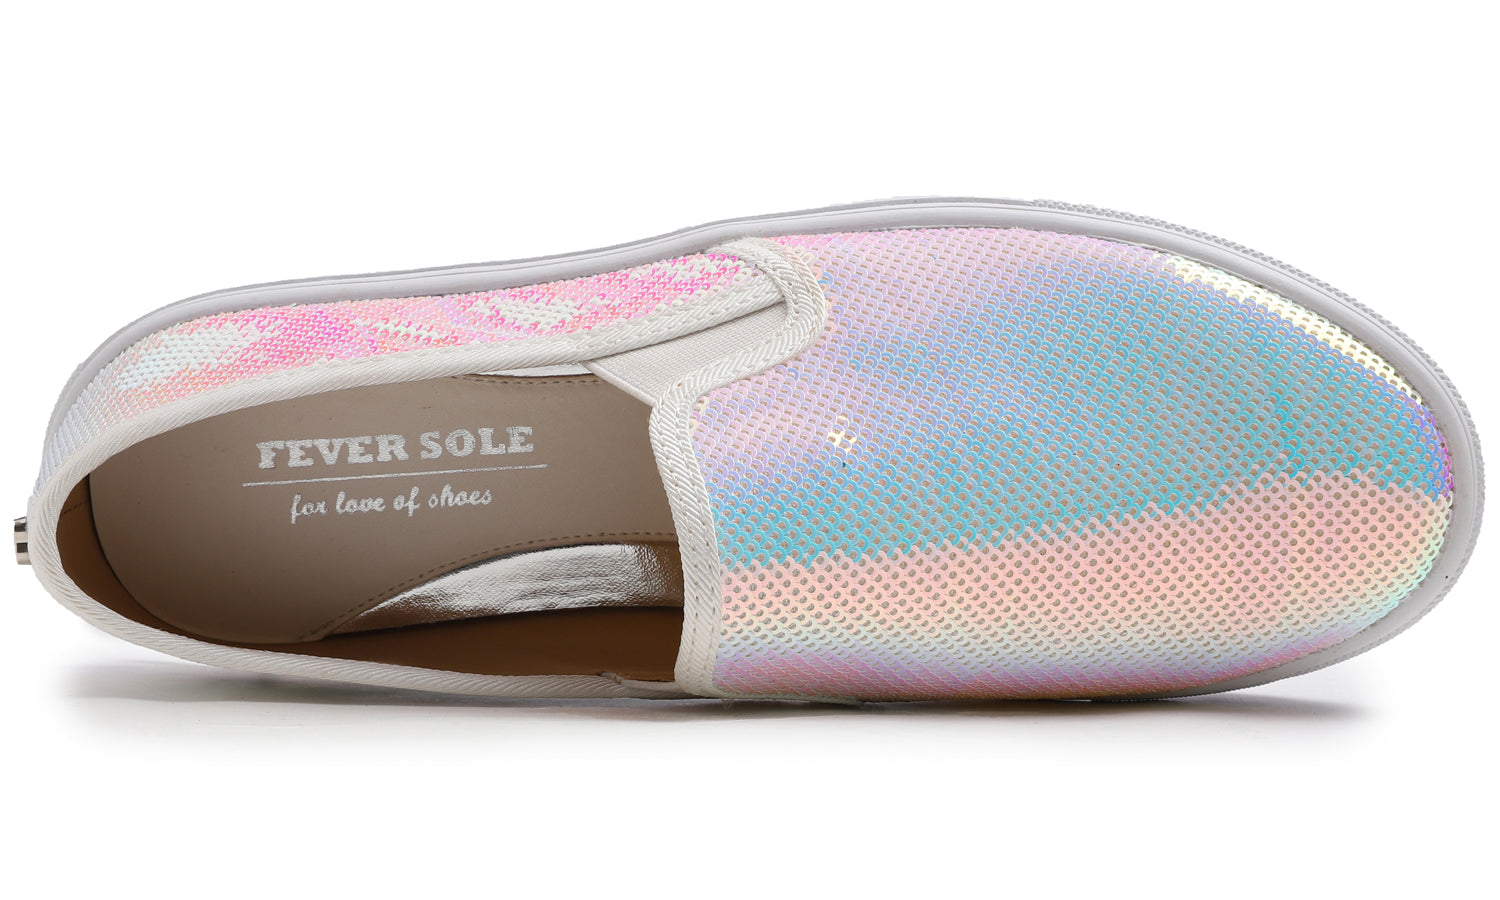 Feversole Women's AB White Sequin Slip On Sneaker Casual Flat Loafers